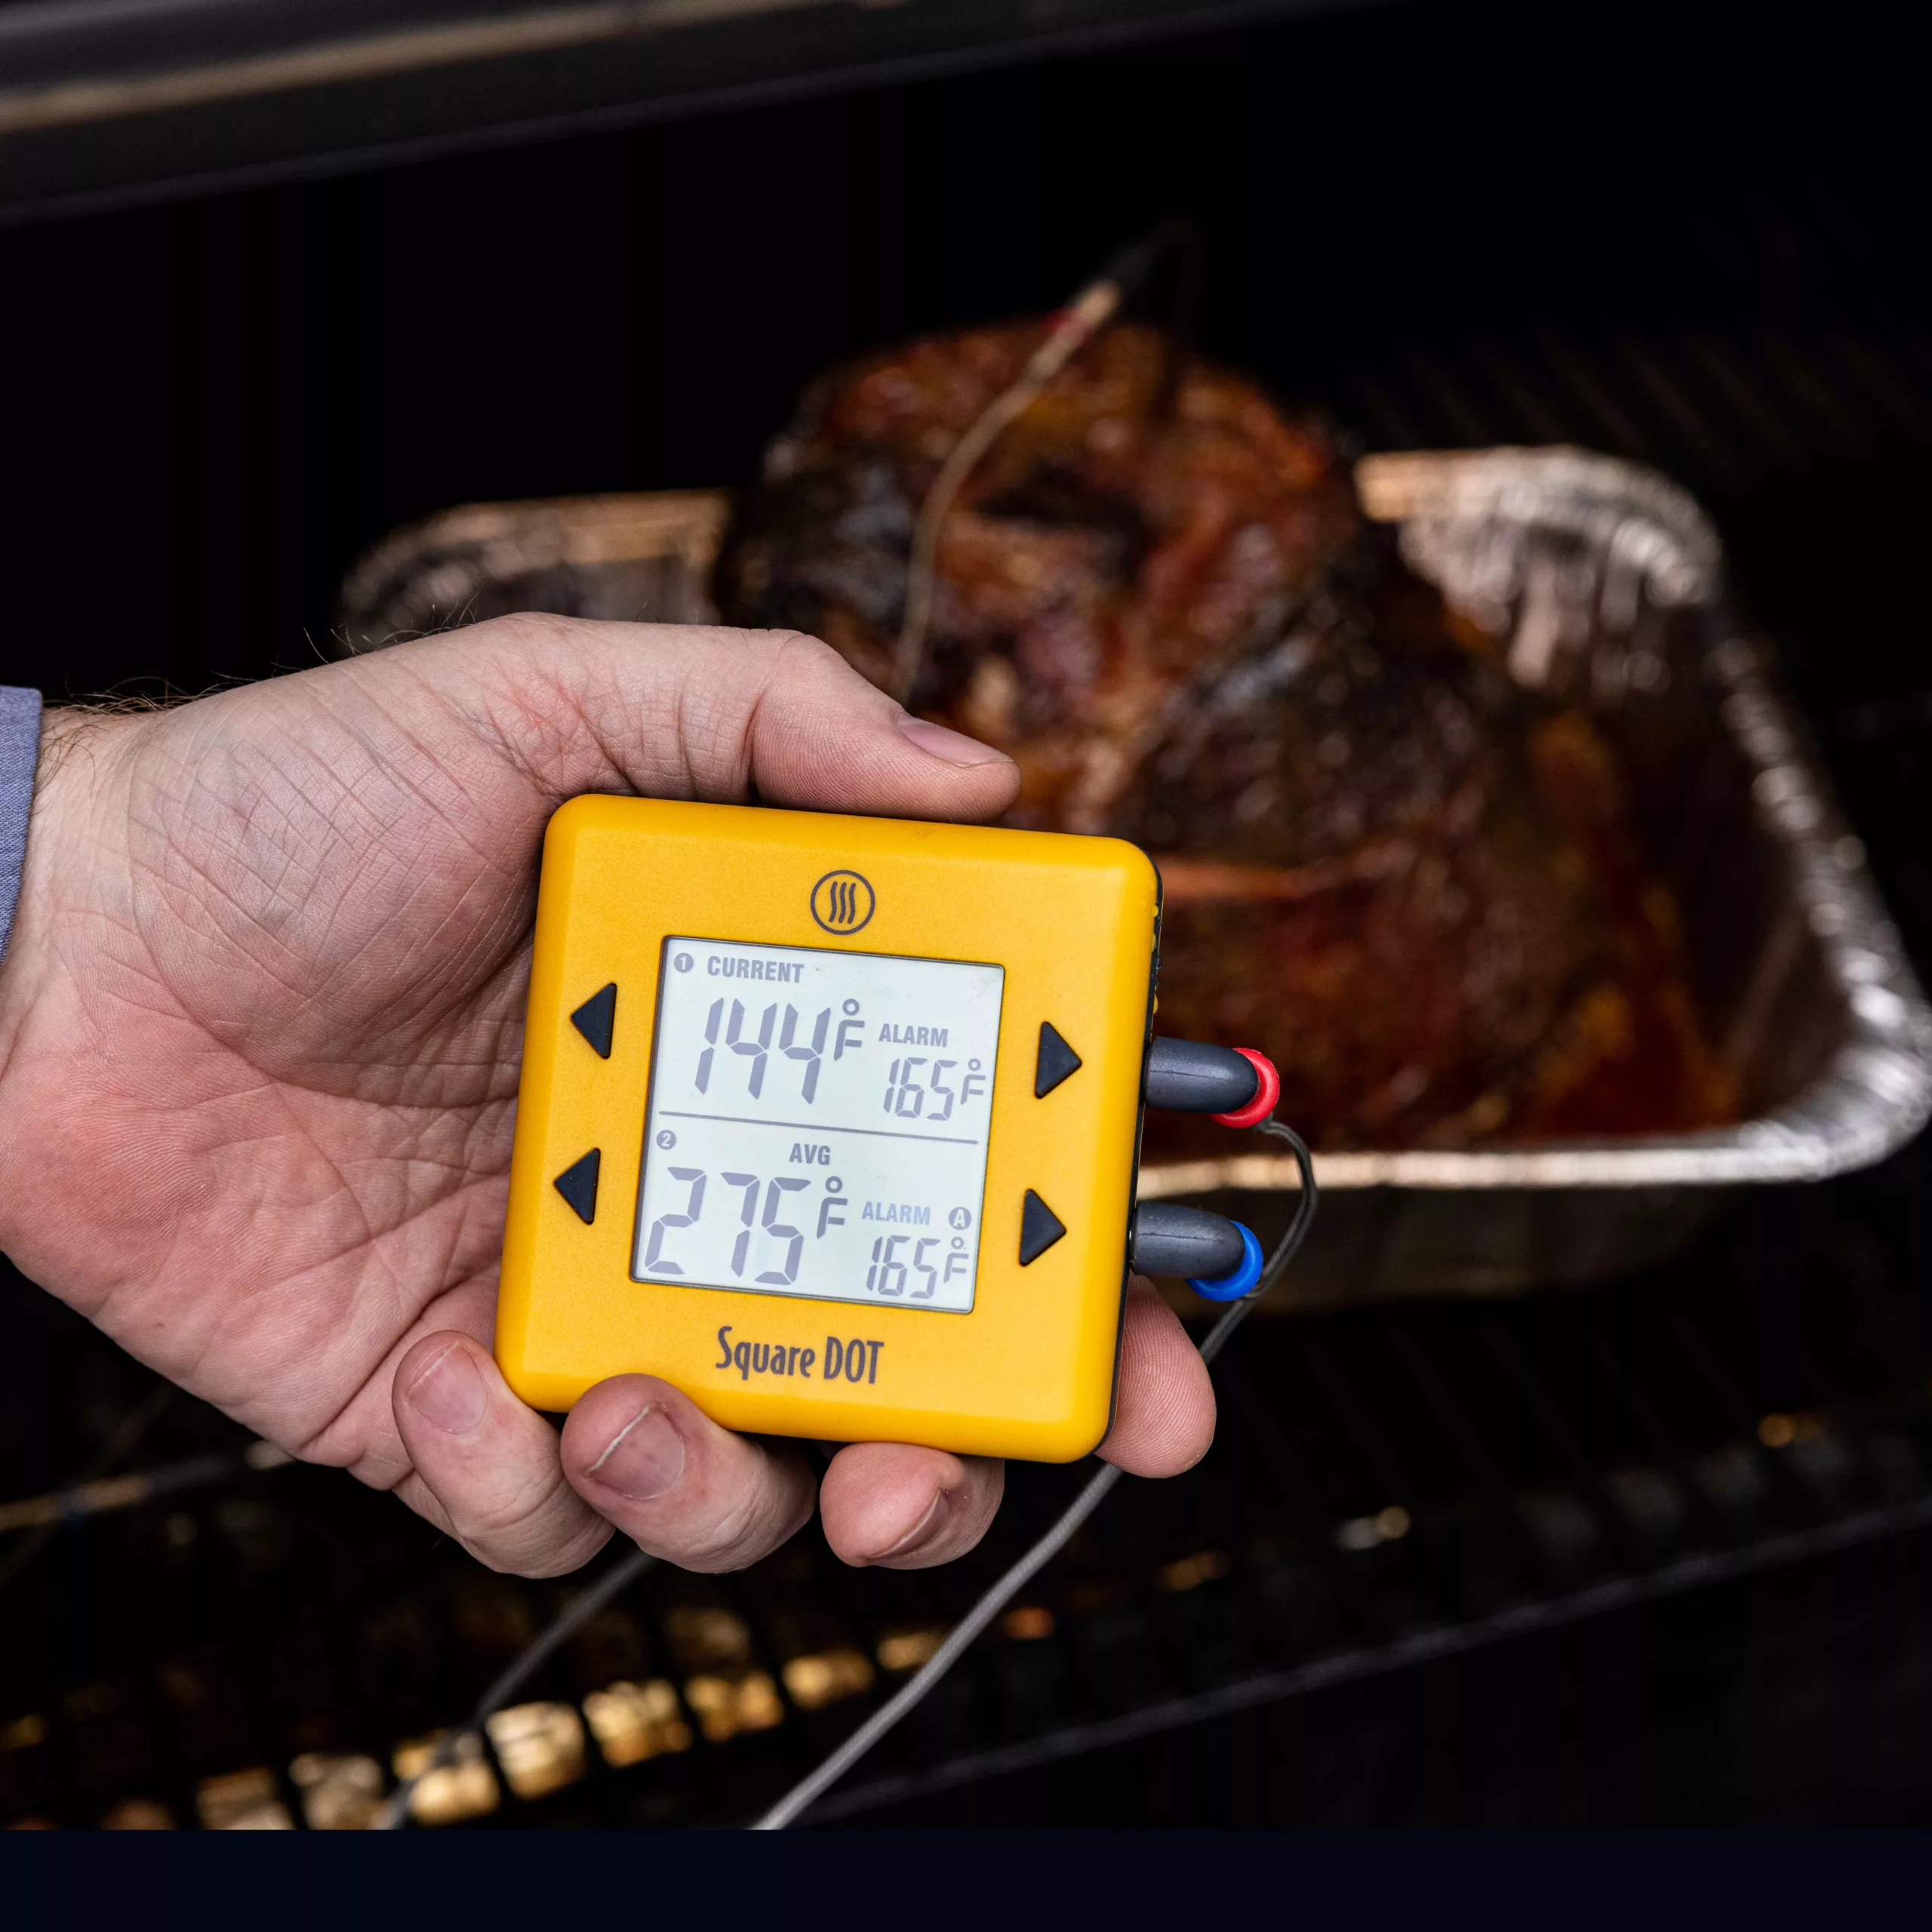 https://www.sizzleandsear.com/wp-content/uploads/2022/01/Thermoworks-Square-Dot-Thermometer-Average-Oven-Temperature-scaled.webp